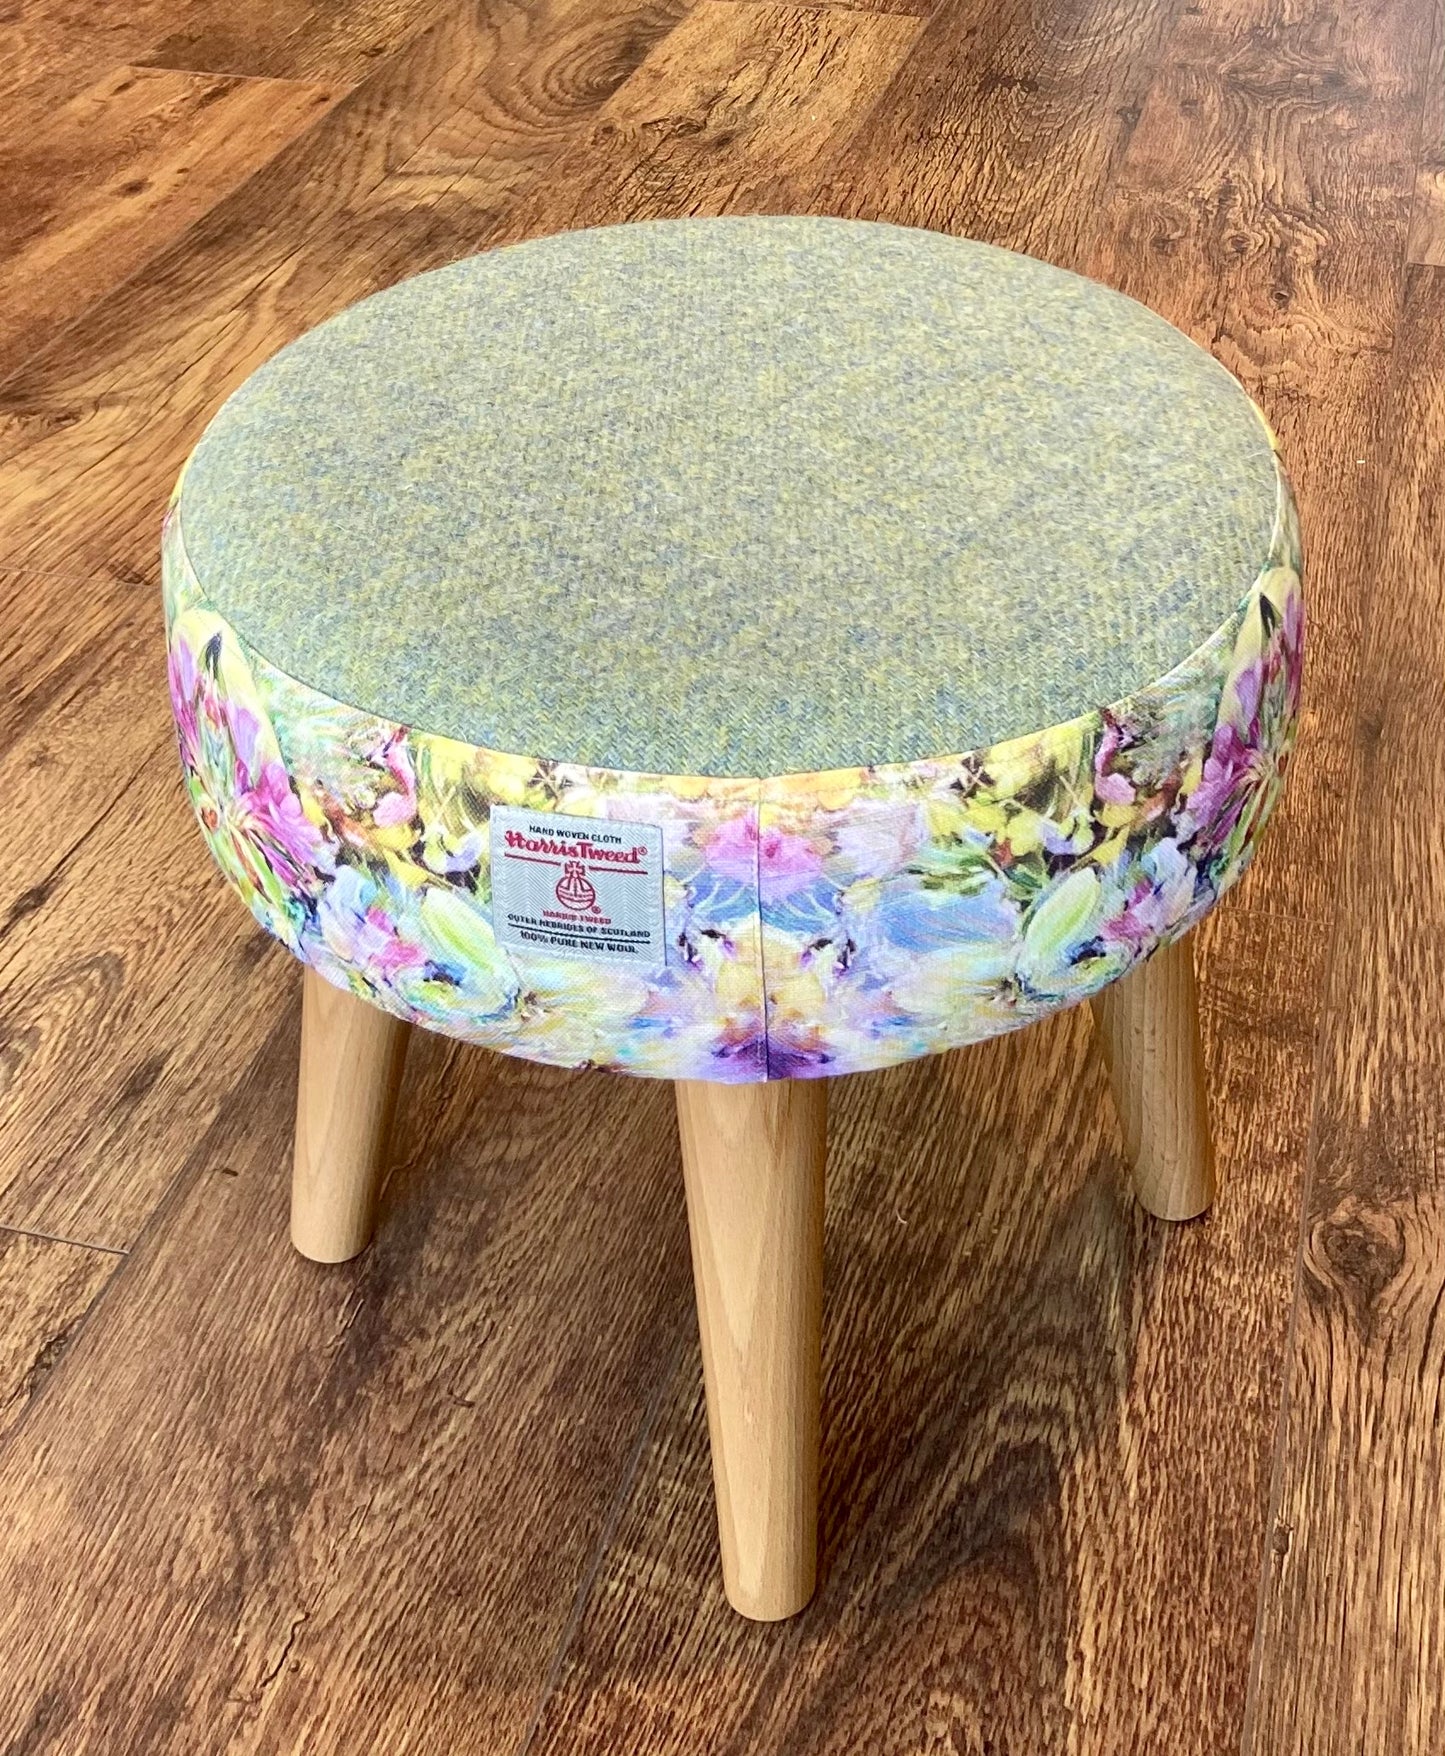 Floral Limited Edition Footstool with Green Harris Tweed and Varnished Wooden Legs